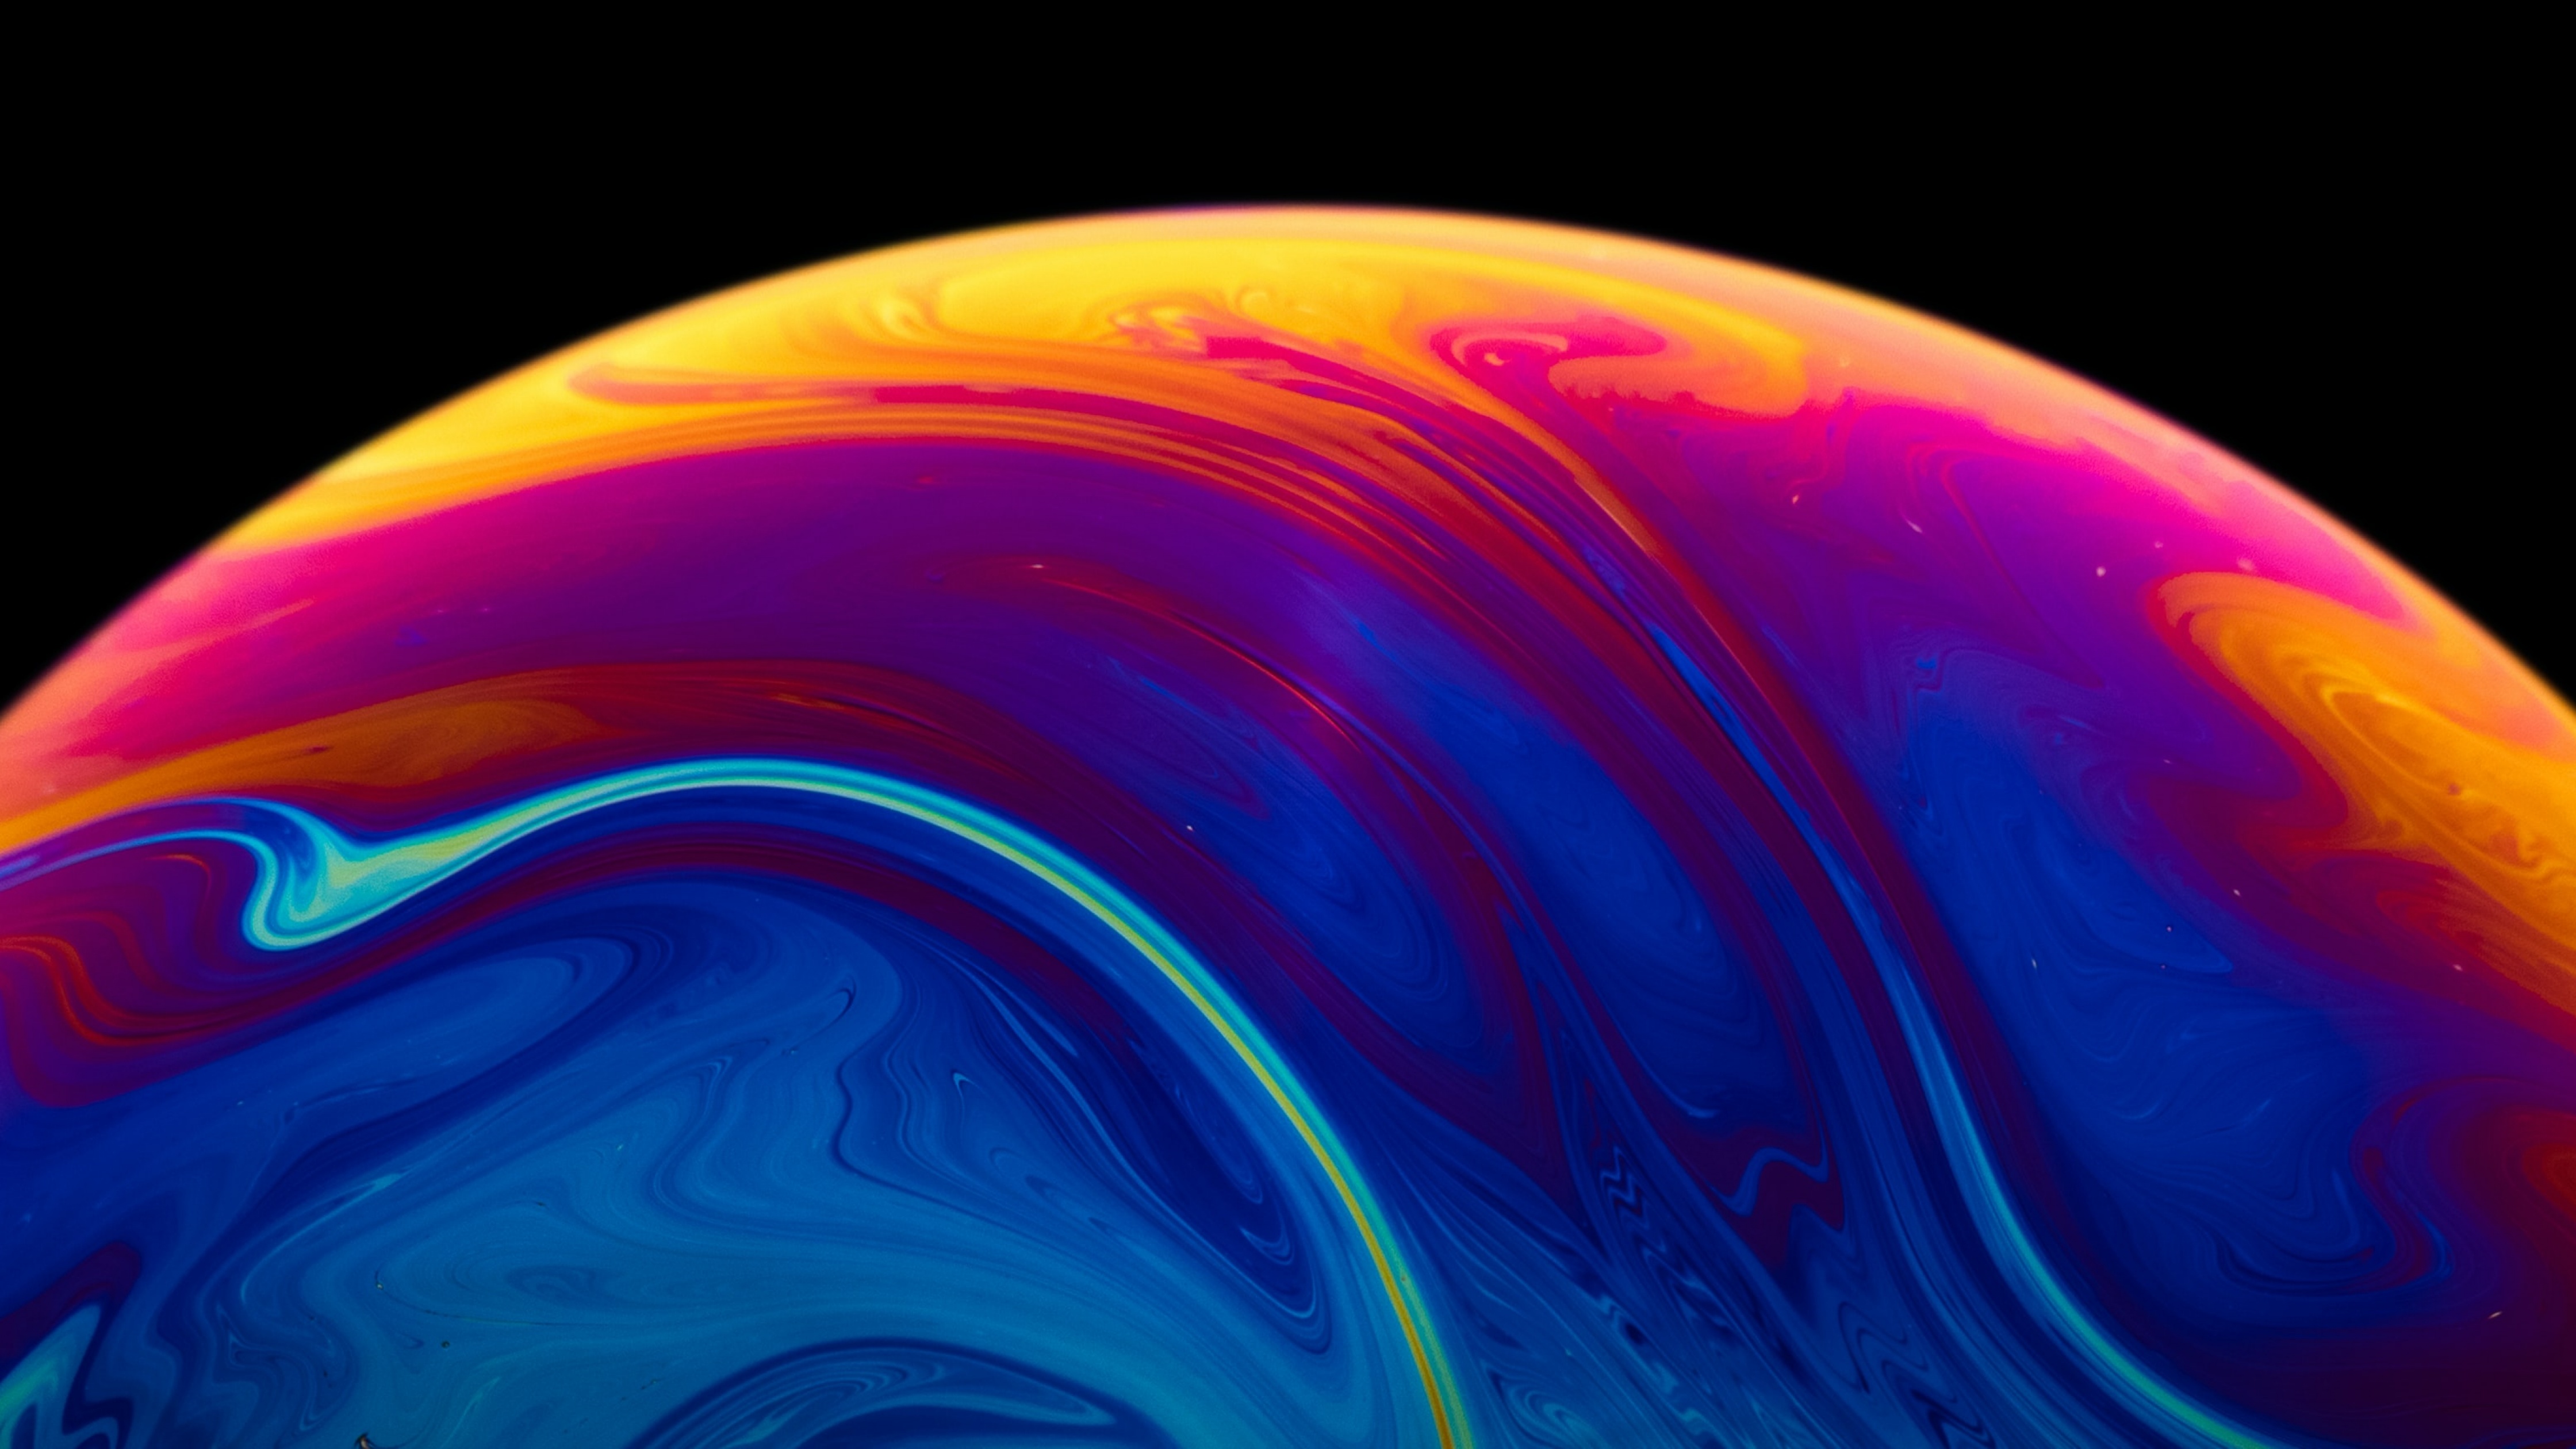 Soap Bubble Wallpaper 4K, Black background, Abstract, #7113